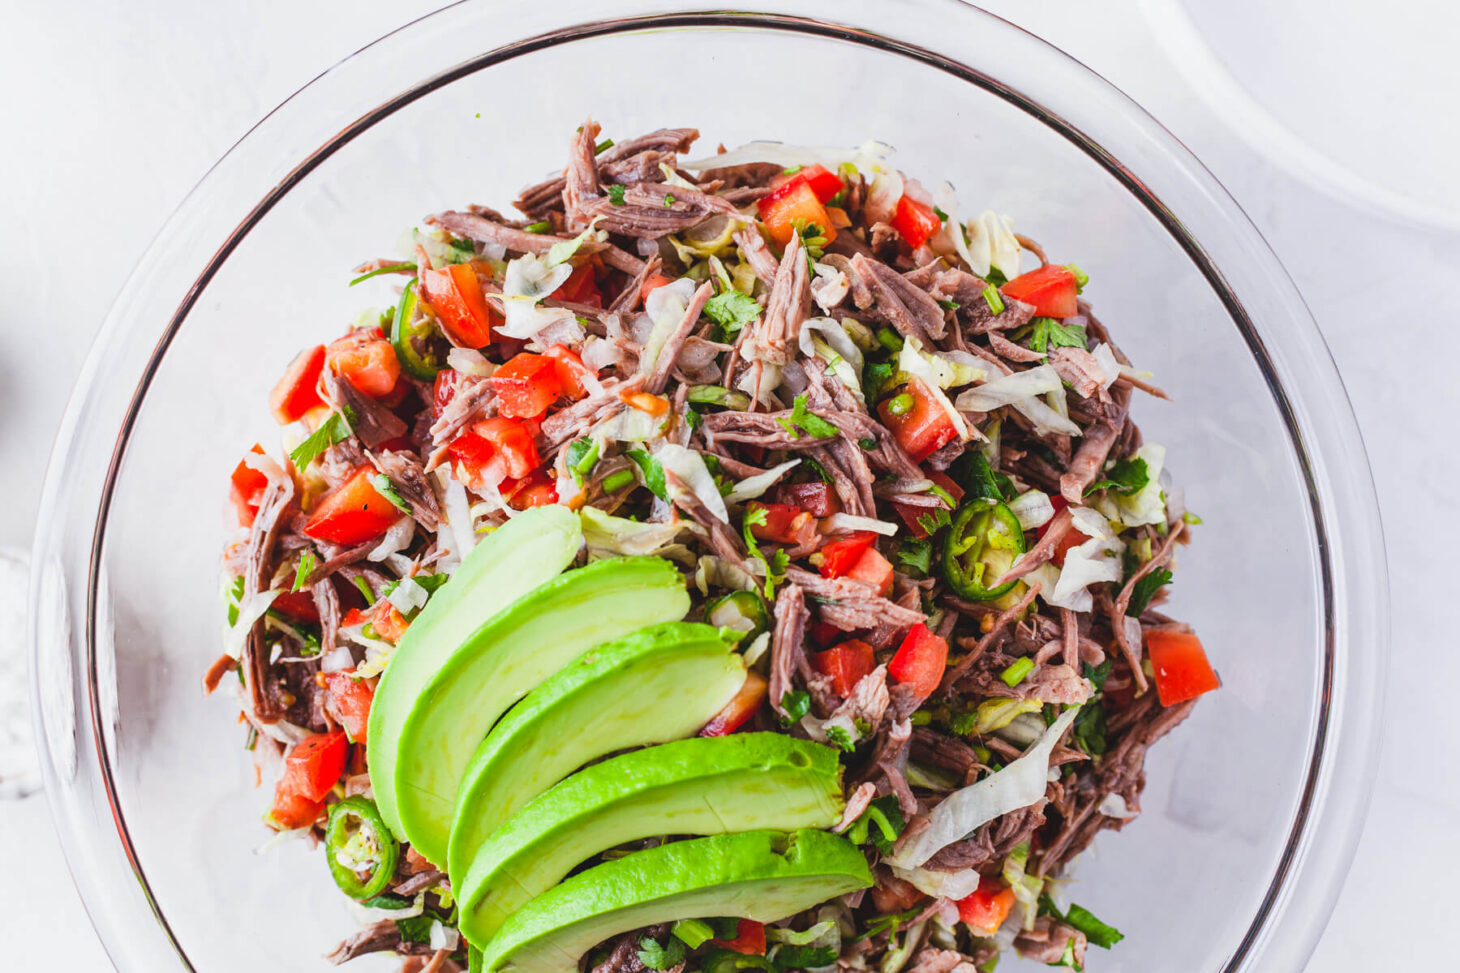 A glass bowl filled with brightly coloured Salpicón (Mexican Shredded Meat Salad) topped with sliced avocado.